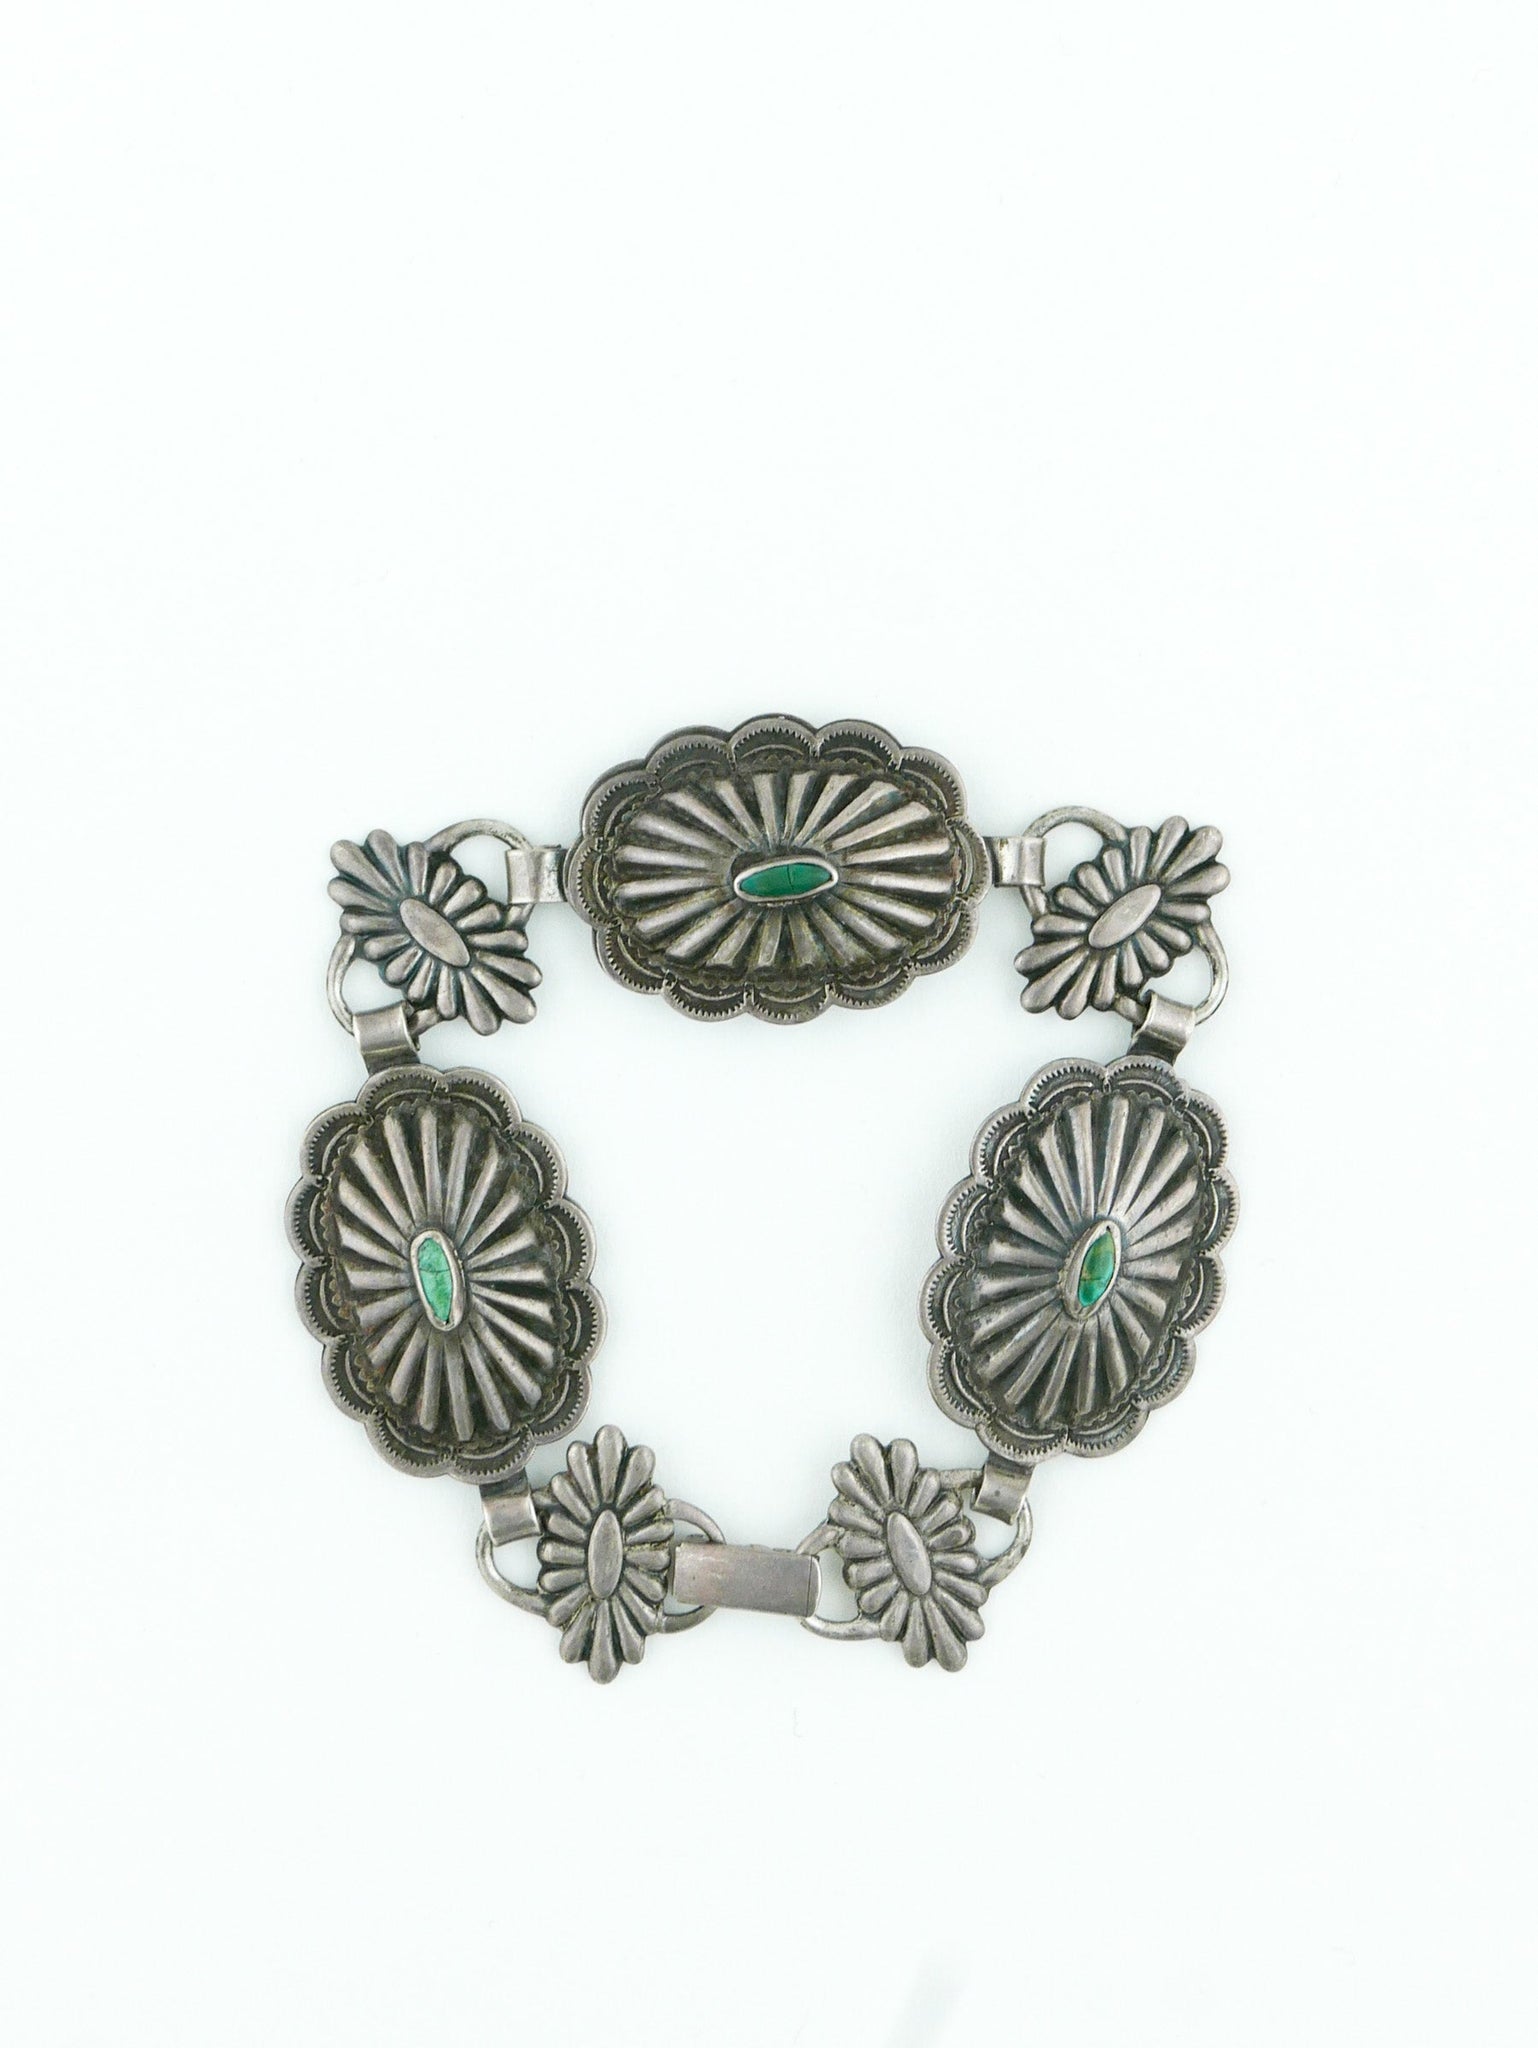 1930's Sterling & Turquoise Concho Bracelet